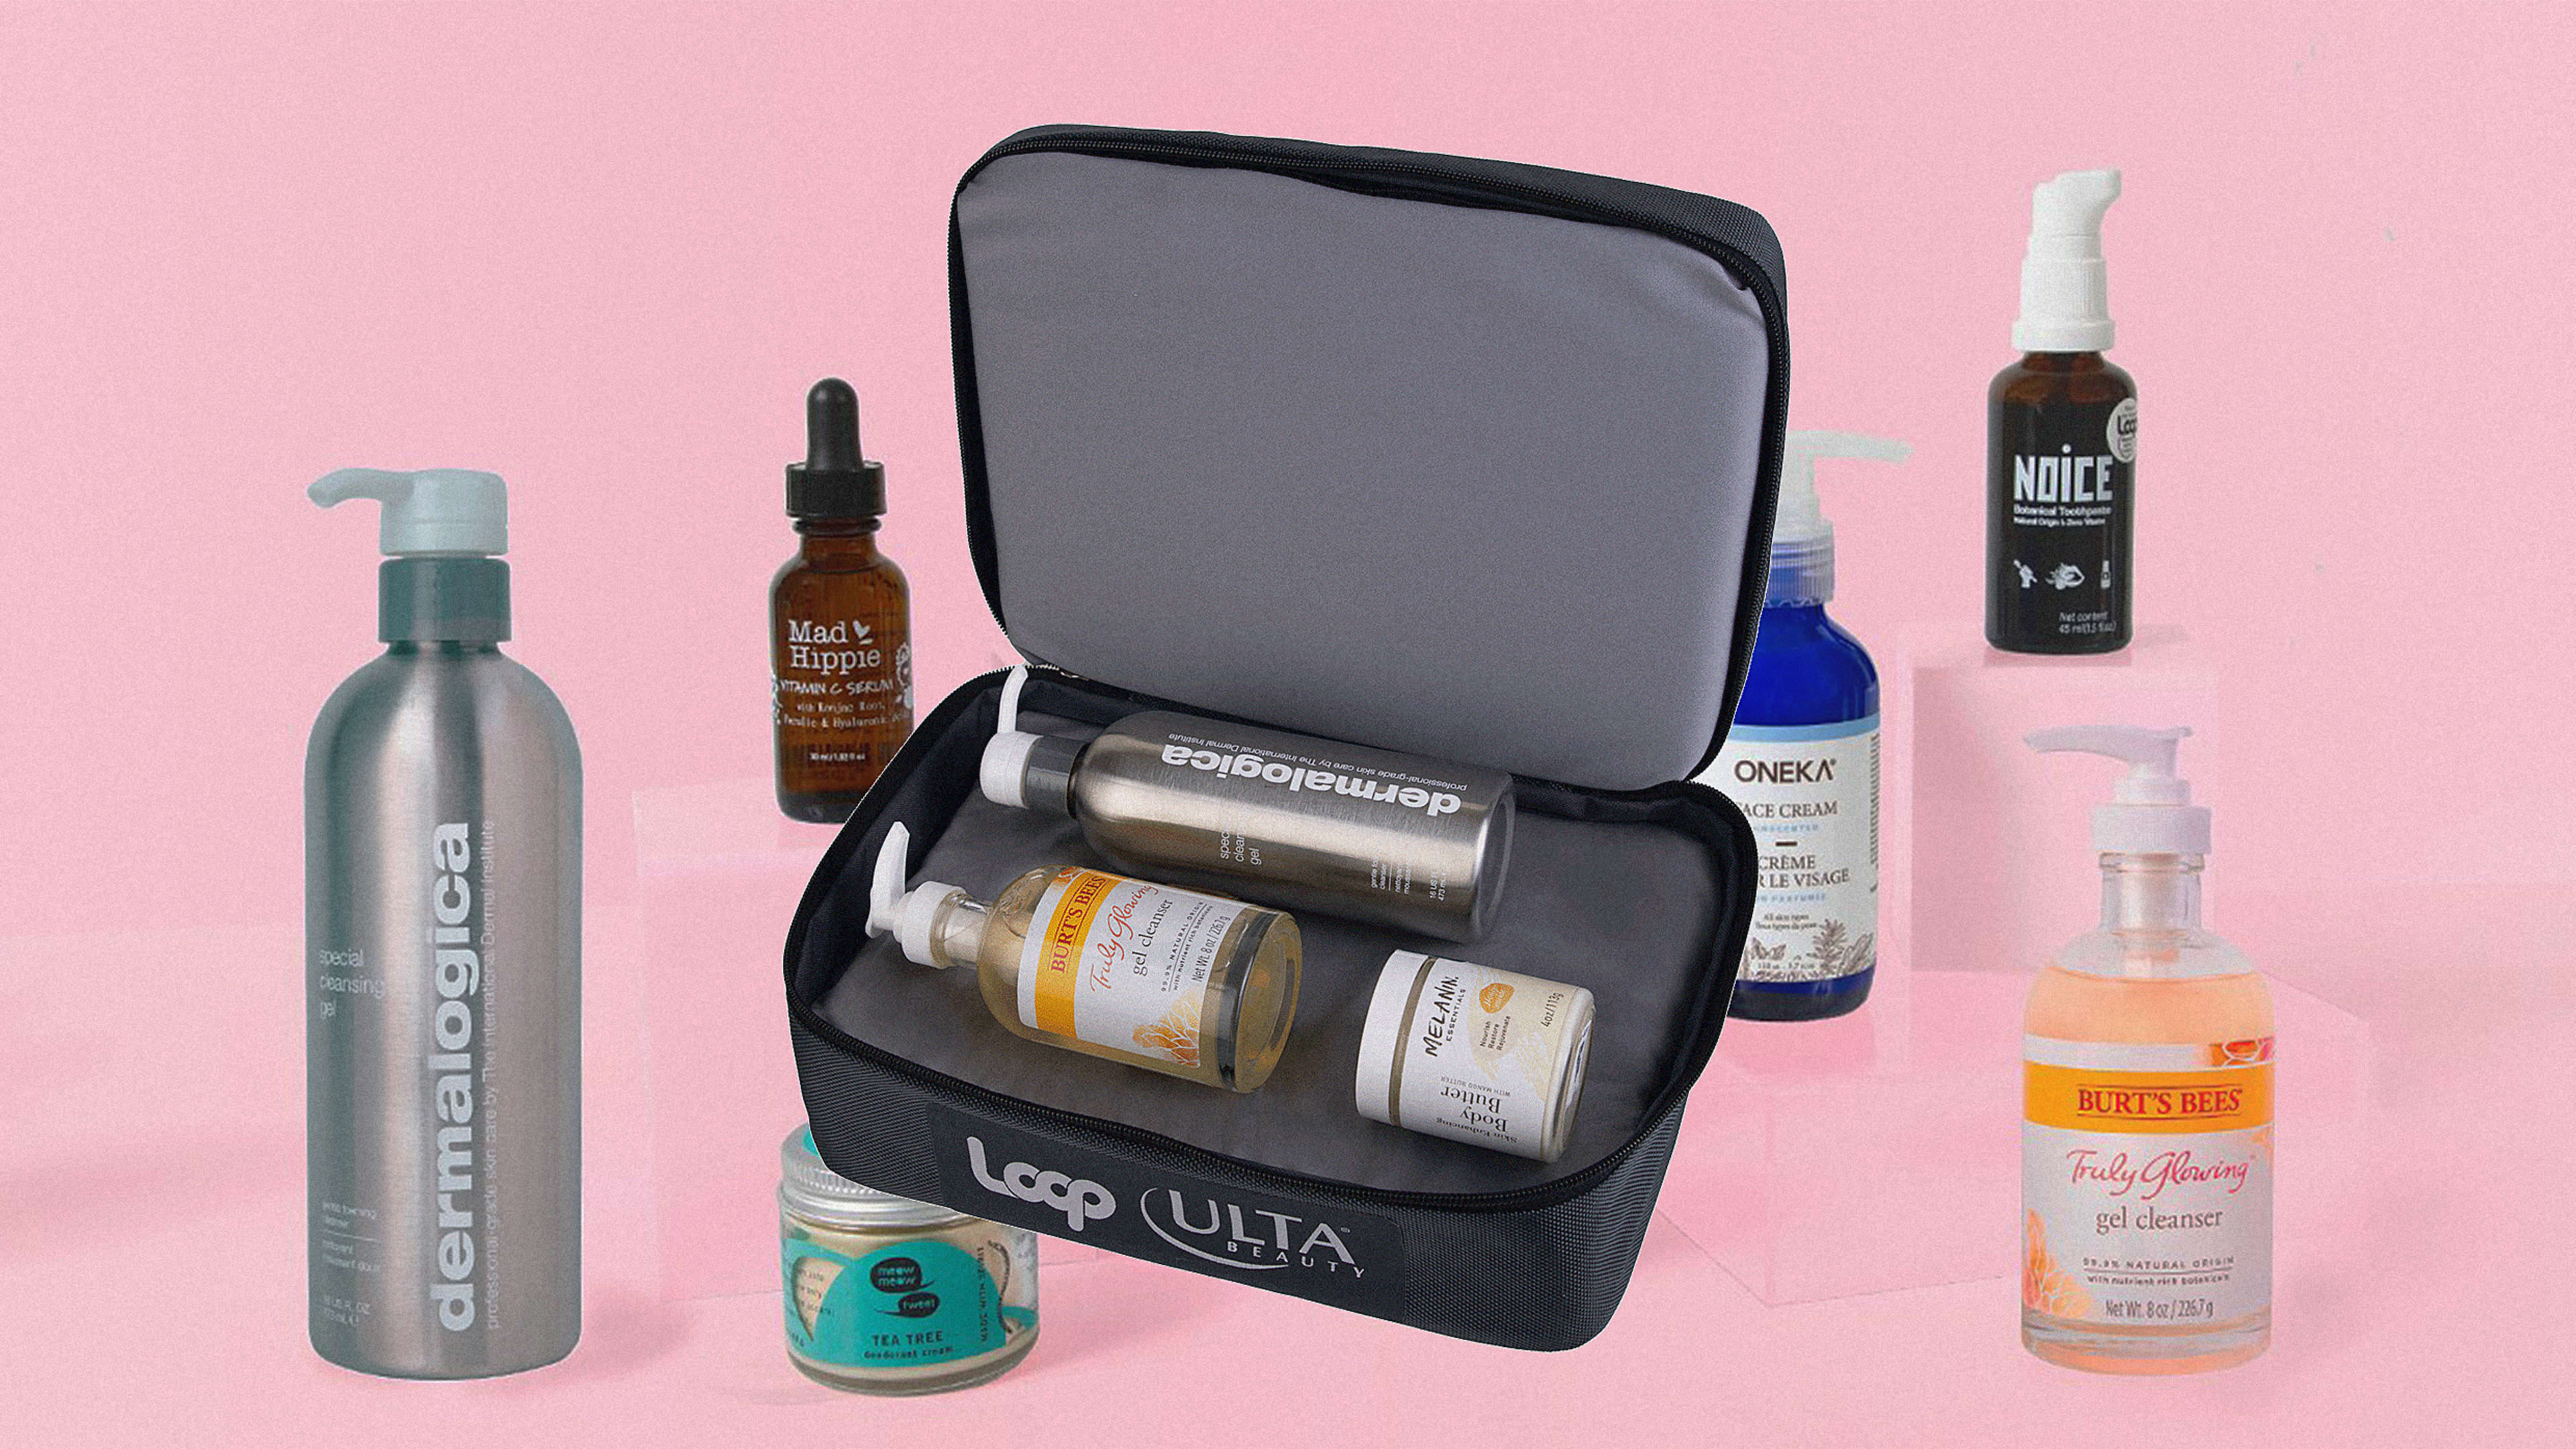 This new Ulta Beauty platform sells beauty products in reusable packaging